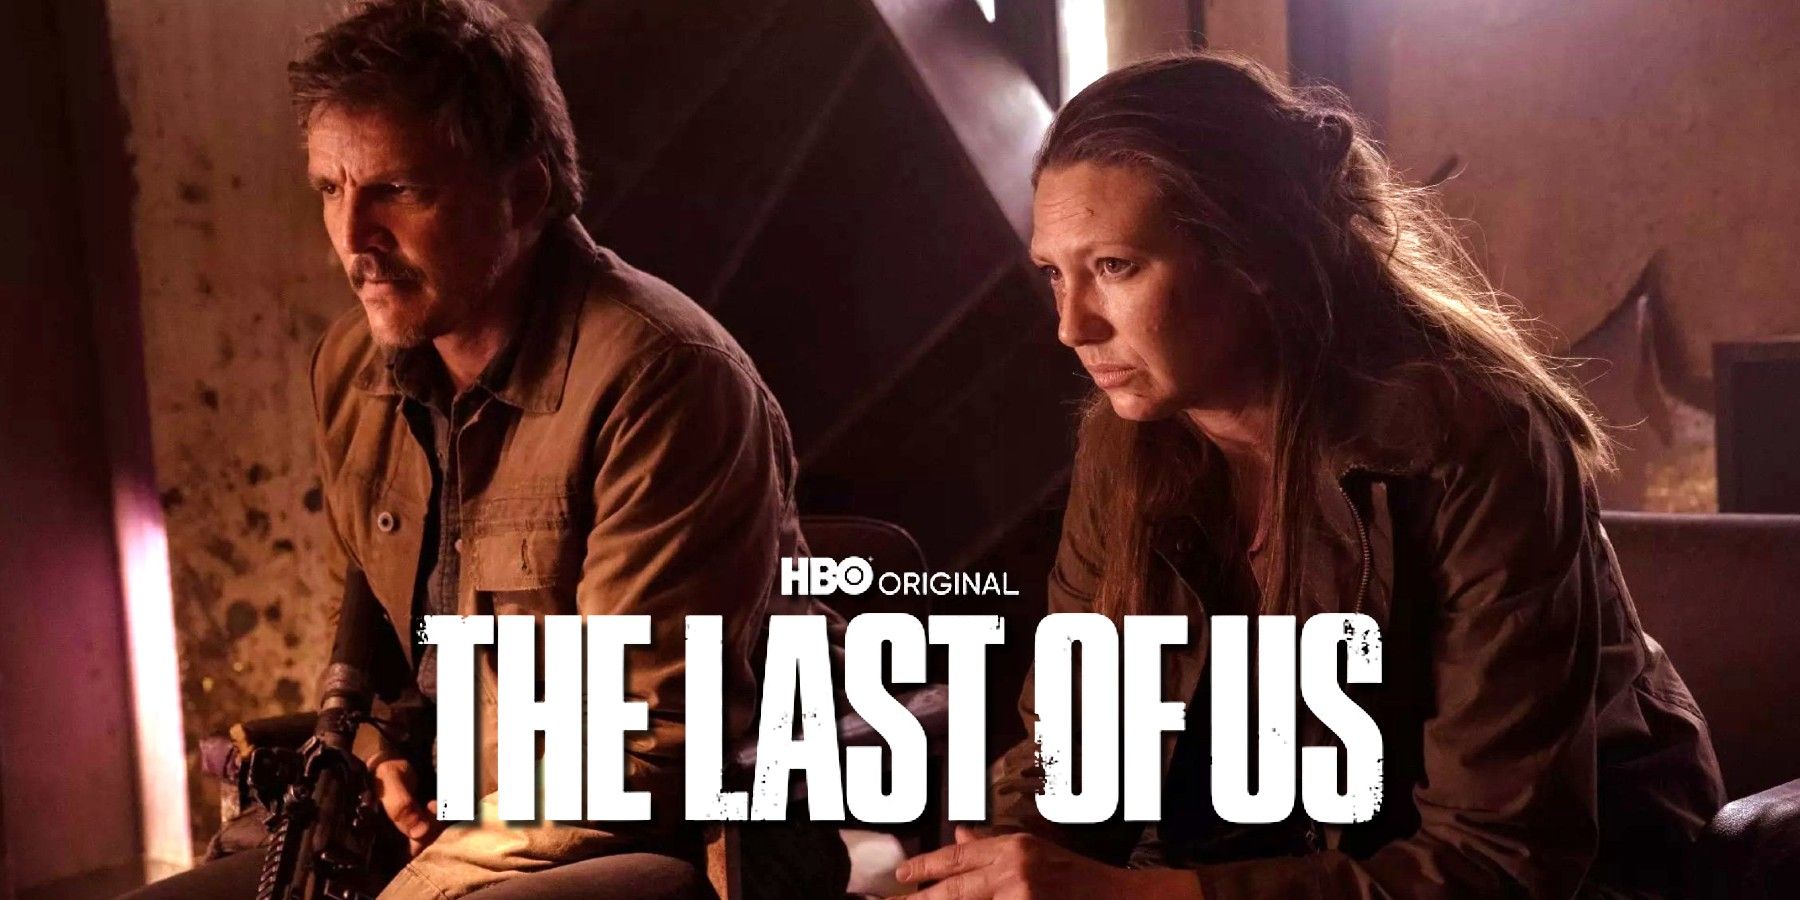 The Last of Us Episode 2 Ratings Rise on HBO